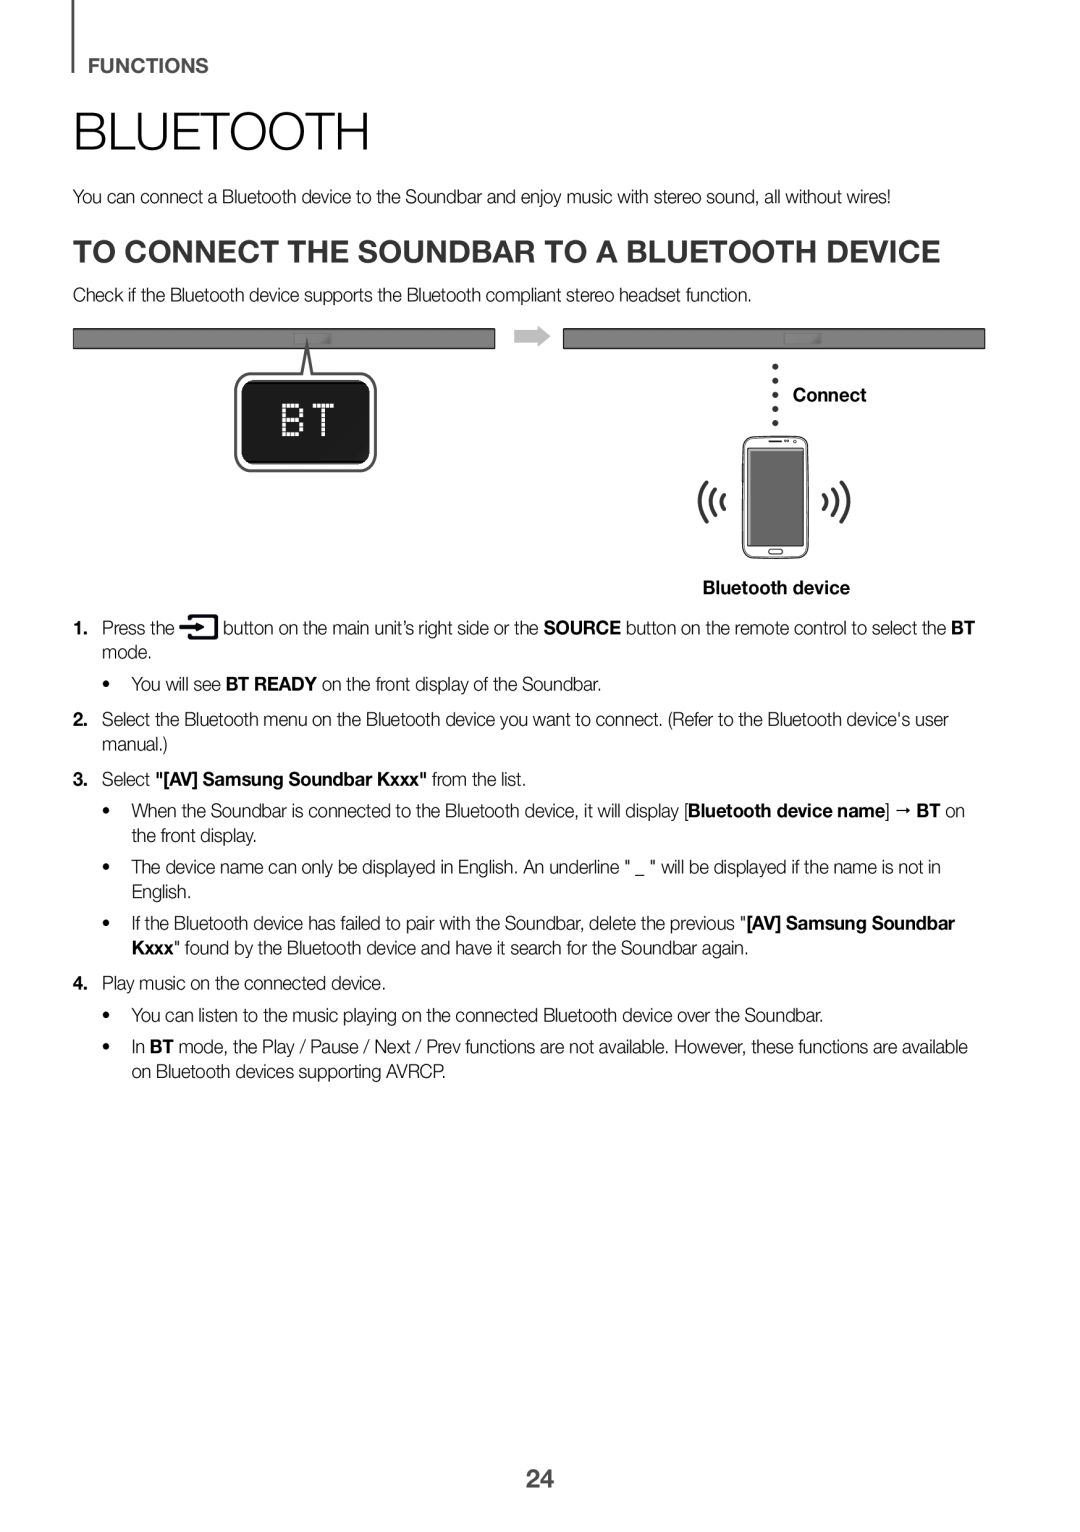 Samsung HW-K651/EN, HW-K650/EN, HW-K651/ZF, HW-K650/ZF To connect the Soundbar to a Bluetooth device, Functions, Connect 